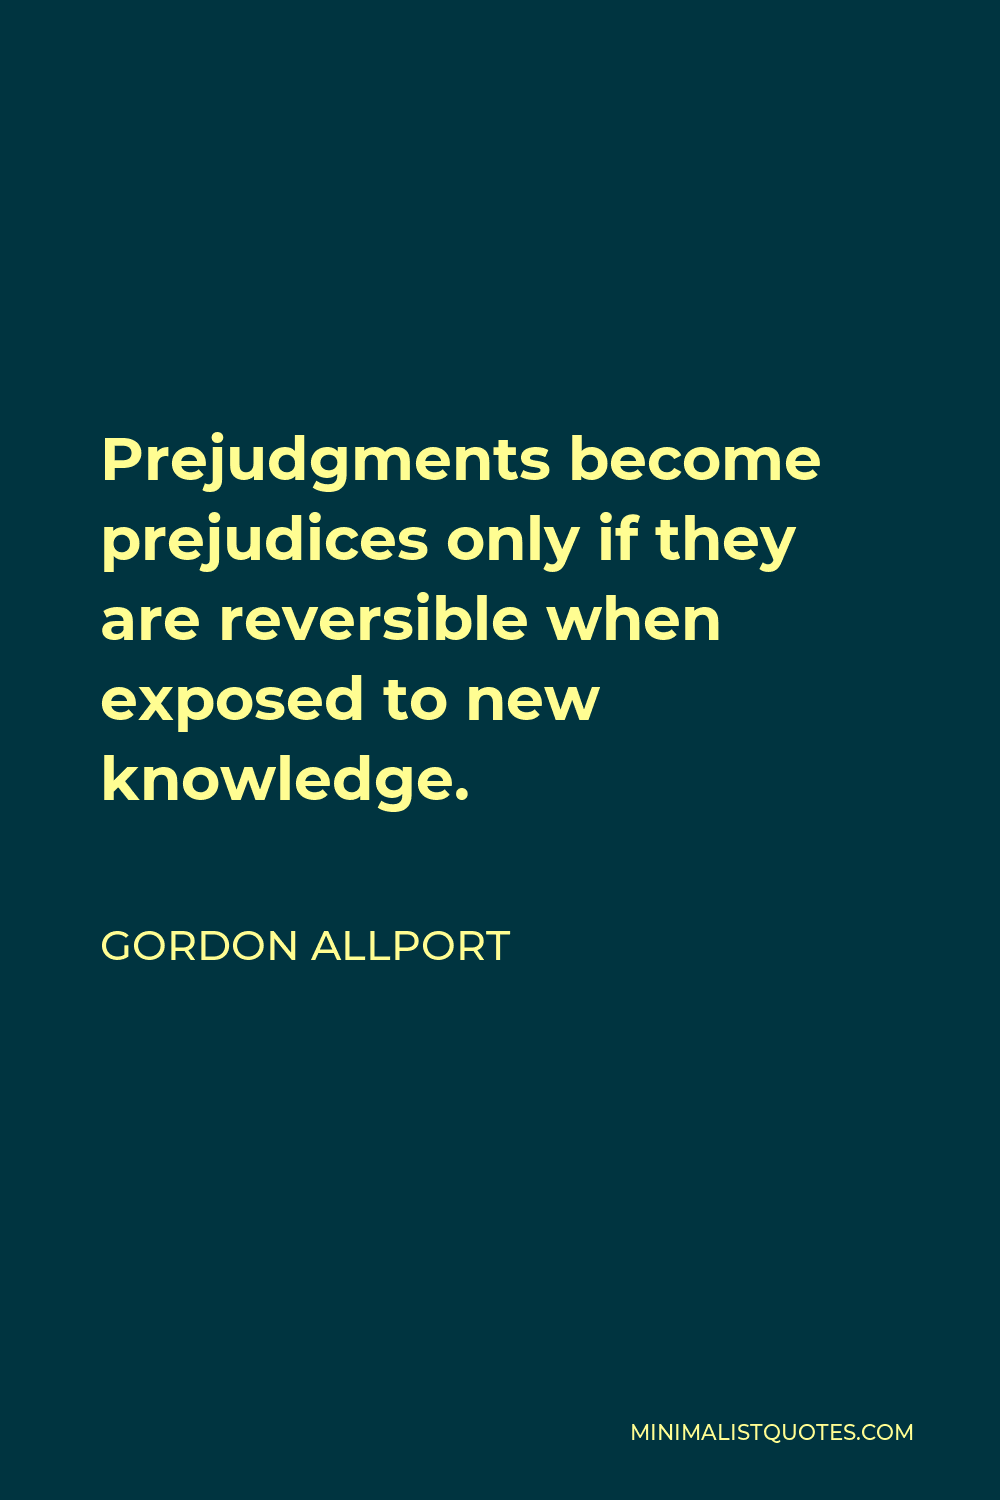 Gordon Allport Quote - Prejudgments become prejudices only if they are reversible when exposed to new knowledge.